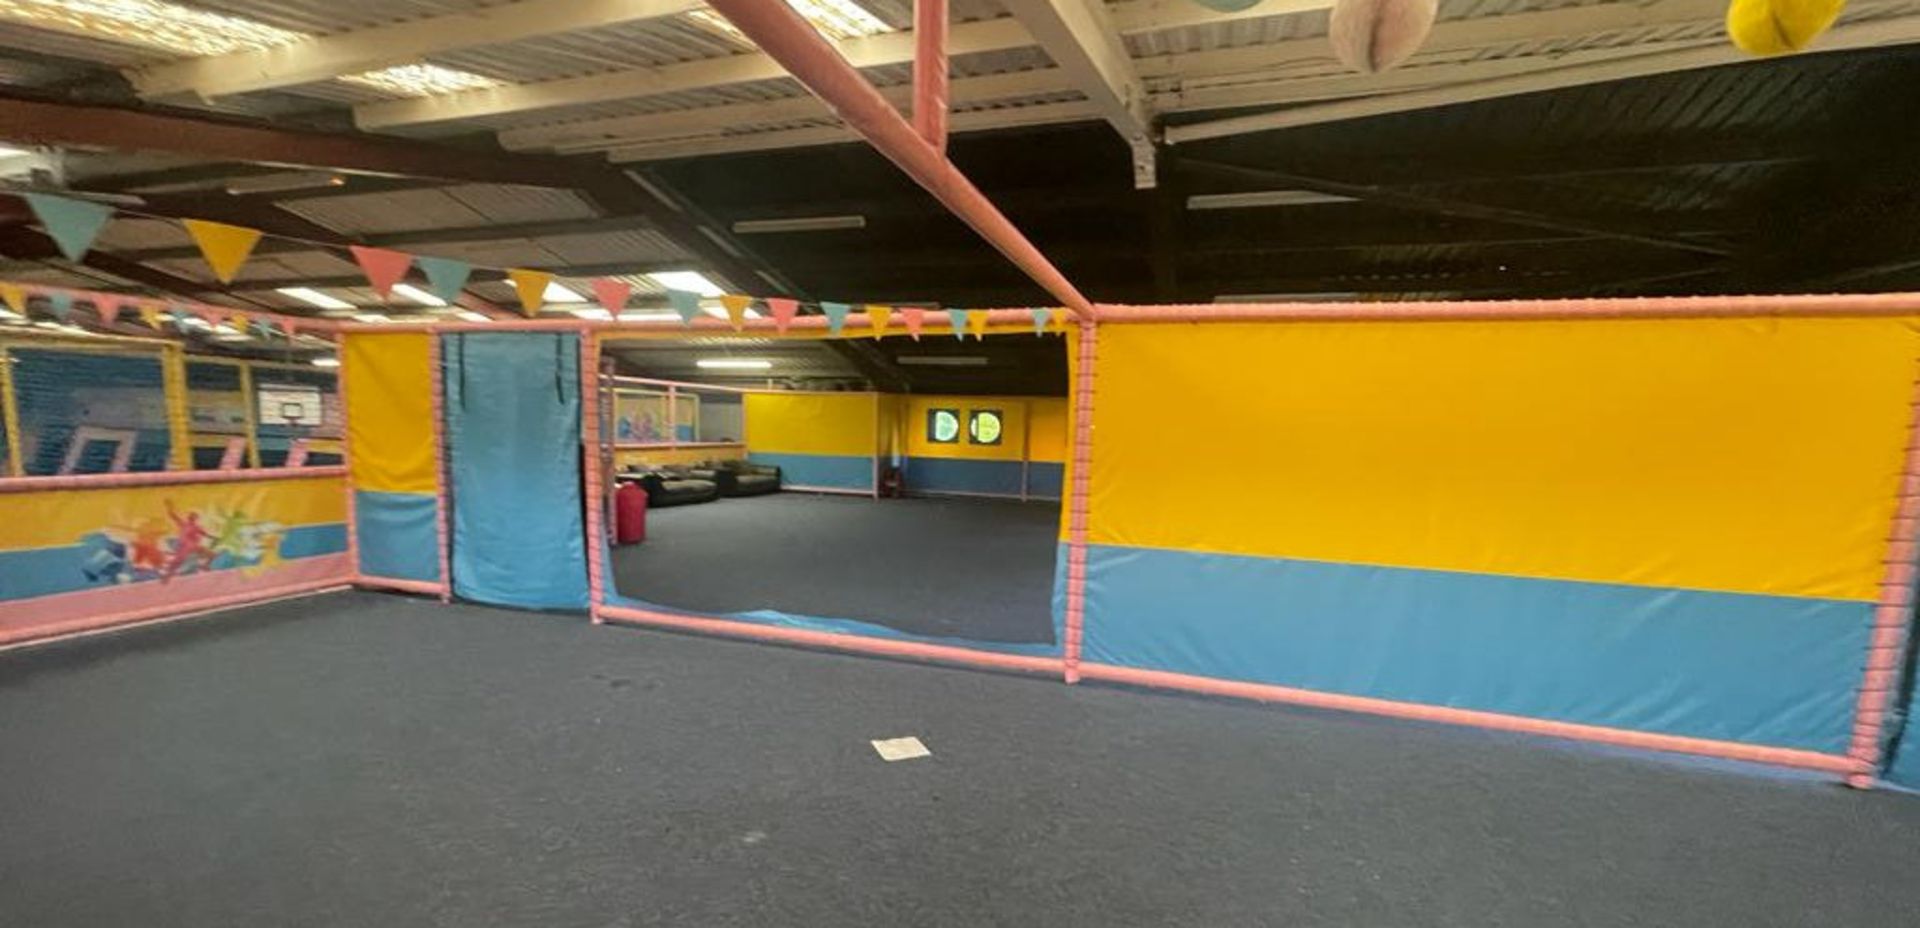 1 x Trampoline Park With Over 40 Interconnected Trampolines, Inflatable Activity Area, Waiting - Image 13 of 99